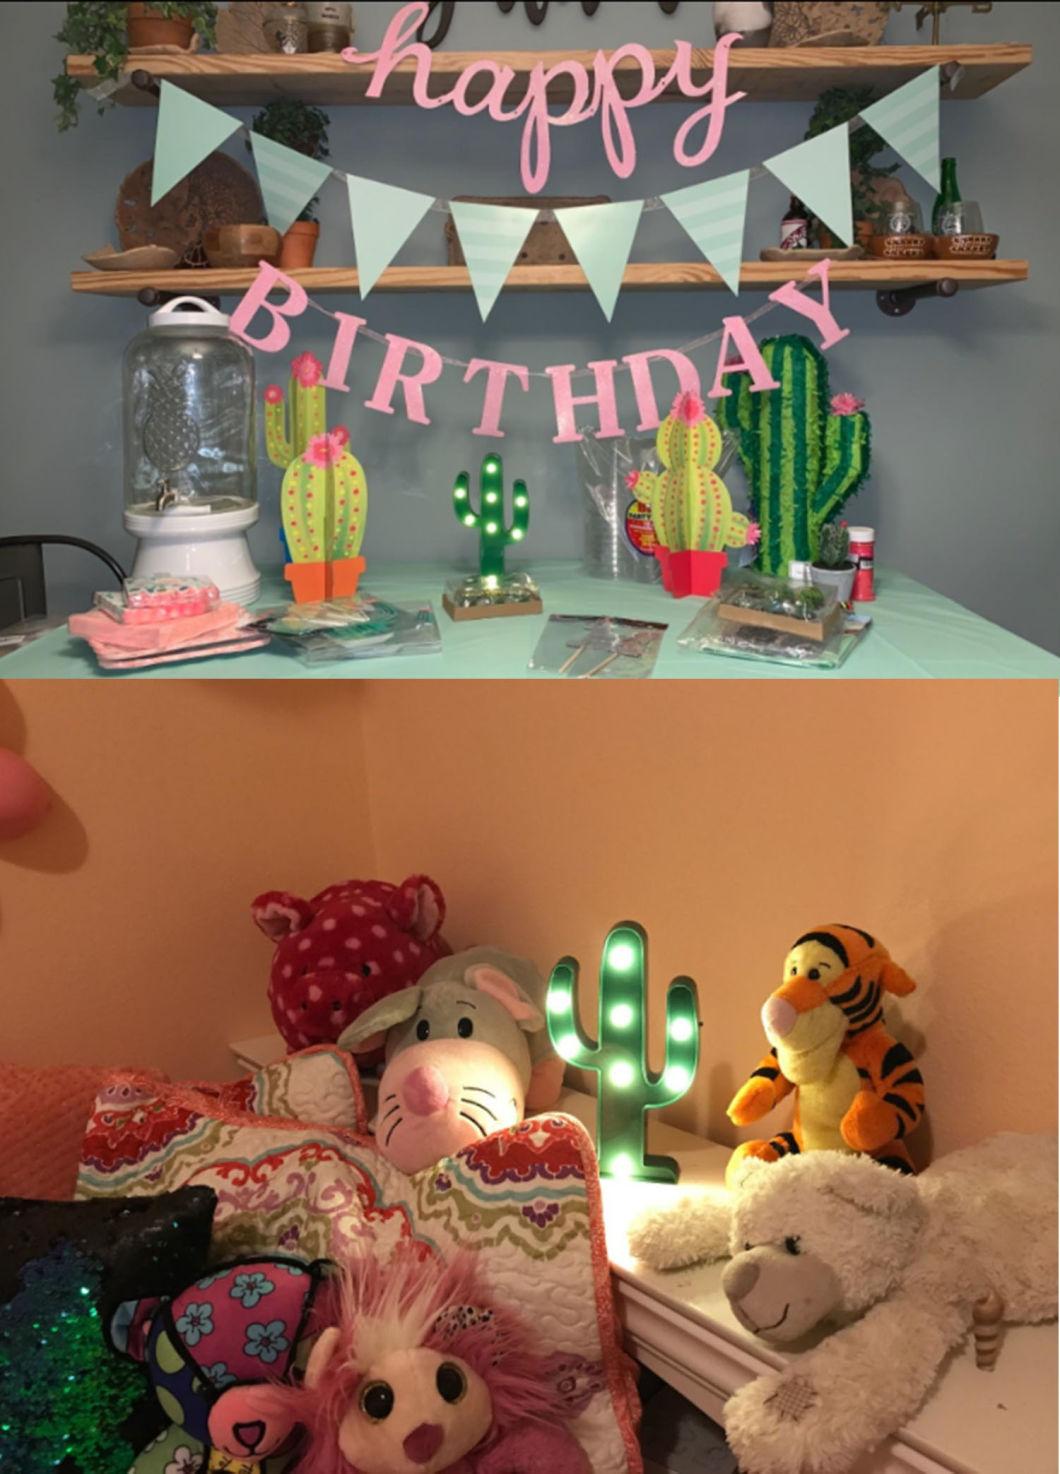 LED Marquee Sign Lights Flamingo Cactus Table Lamp